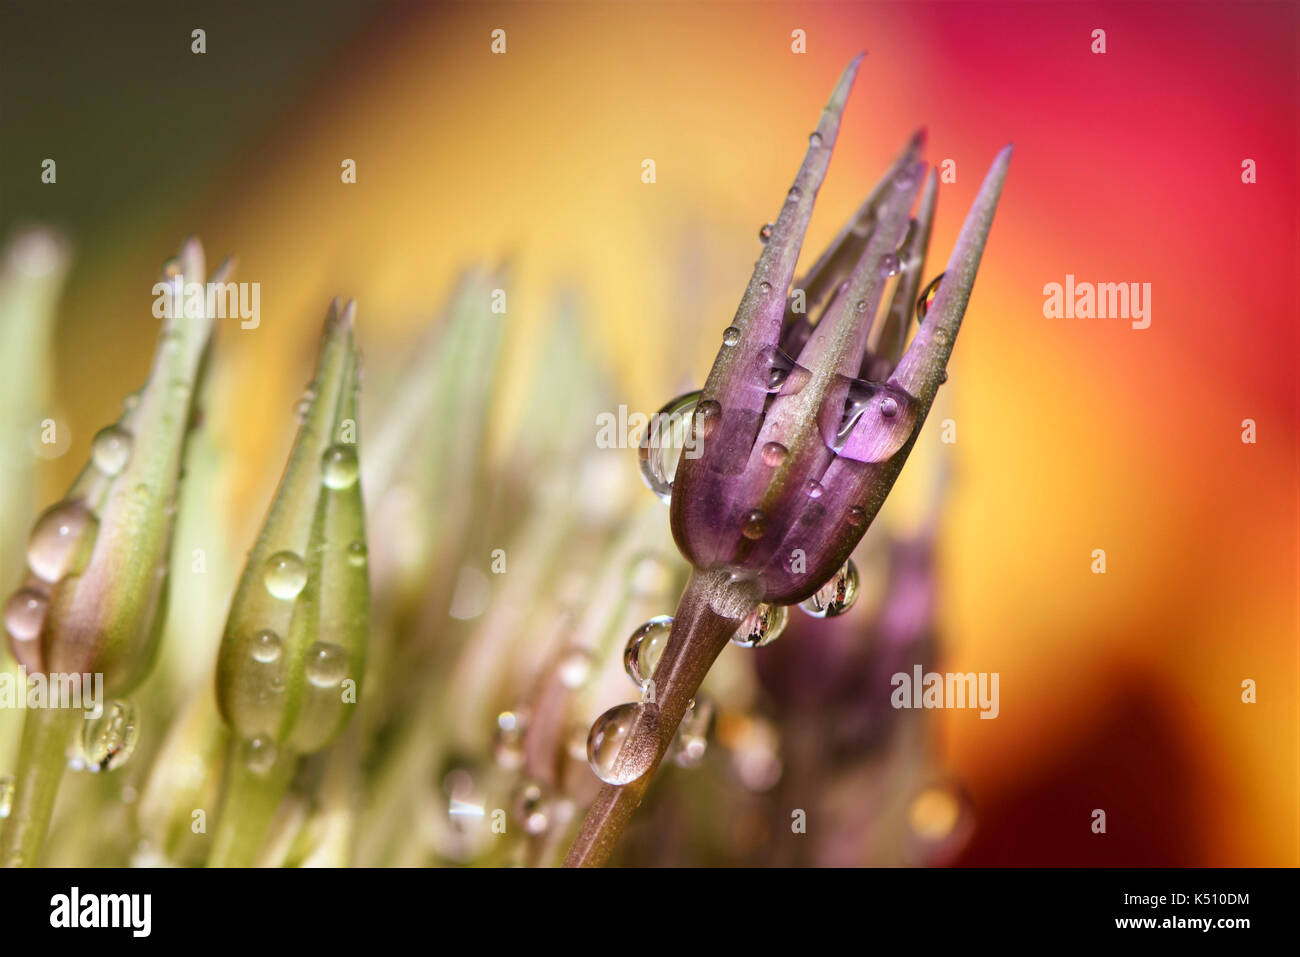 allium flower bud with raindrops on, red and yellow tulip in background, close up macro photograph and reflections in the water drops Stock Photo